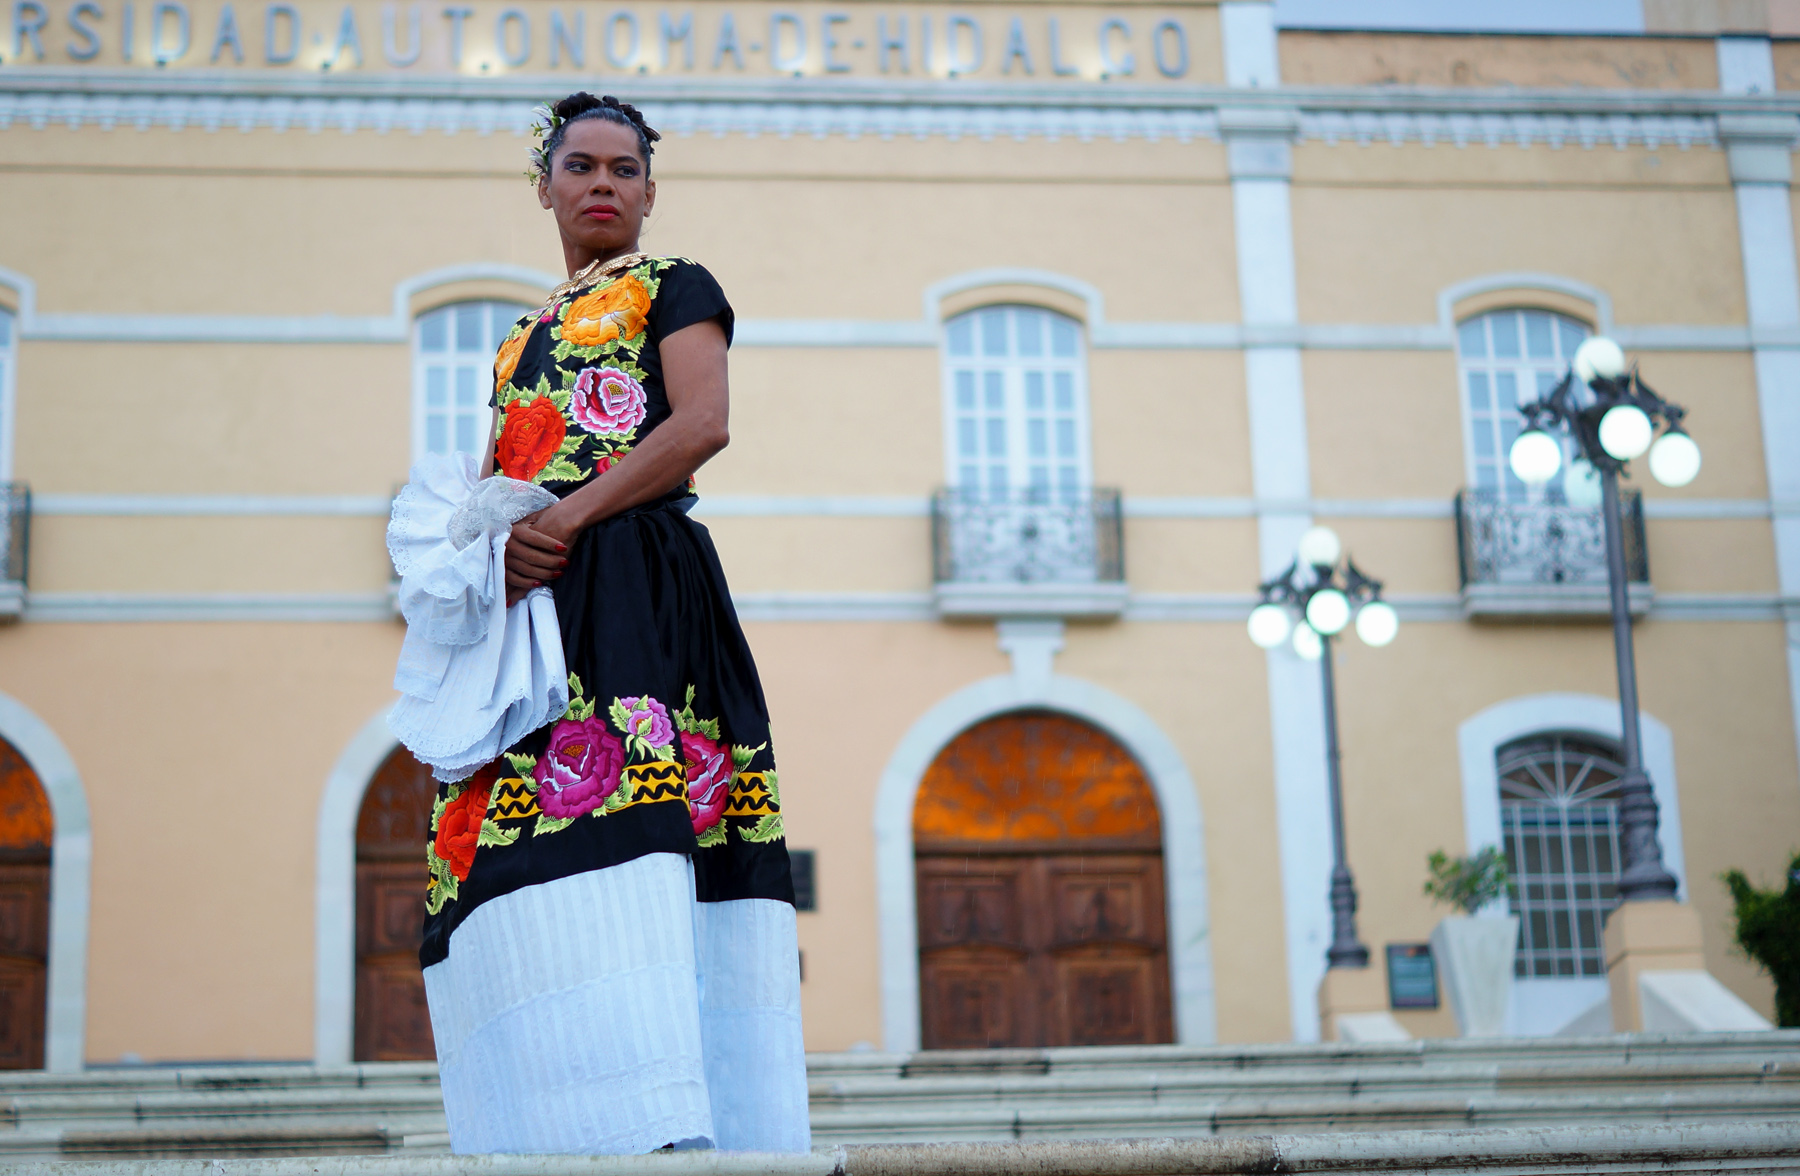 A Muxhe performer standing on steps, wearing a black and white dress with embroidered flowers in red, yellow, and purple